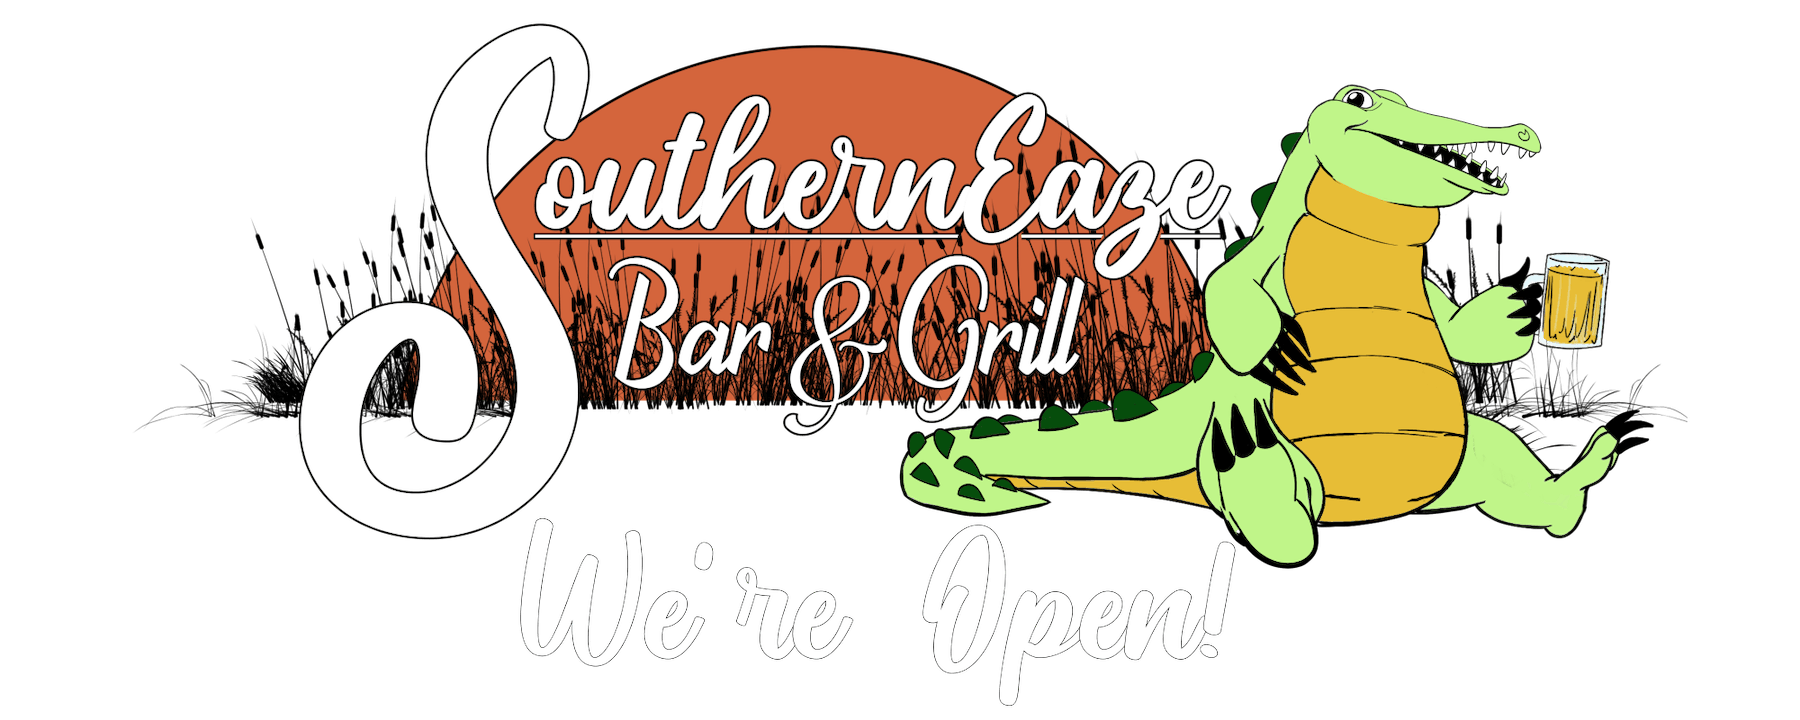 Southern Eaze Bar & Grill Home